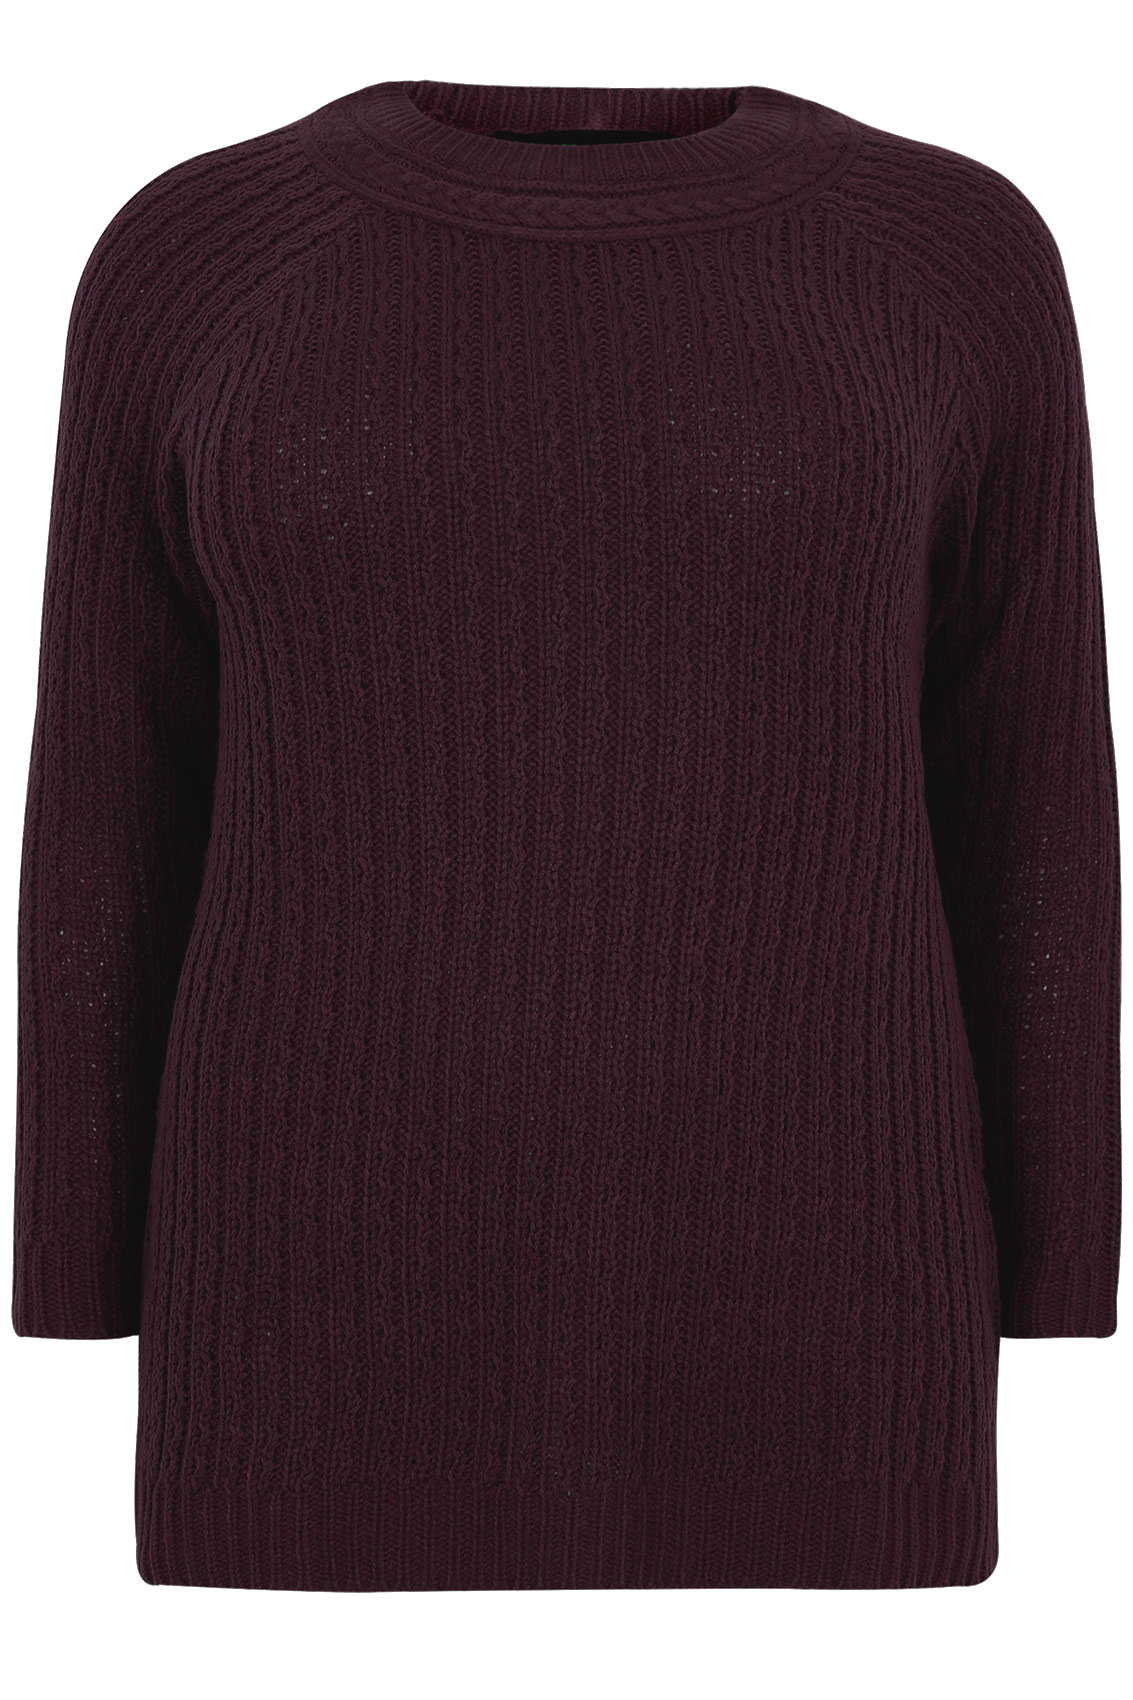 Dark Purple Cable Knit Long Sleeve Jumper Plus Size 16 to 32